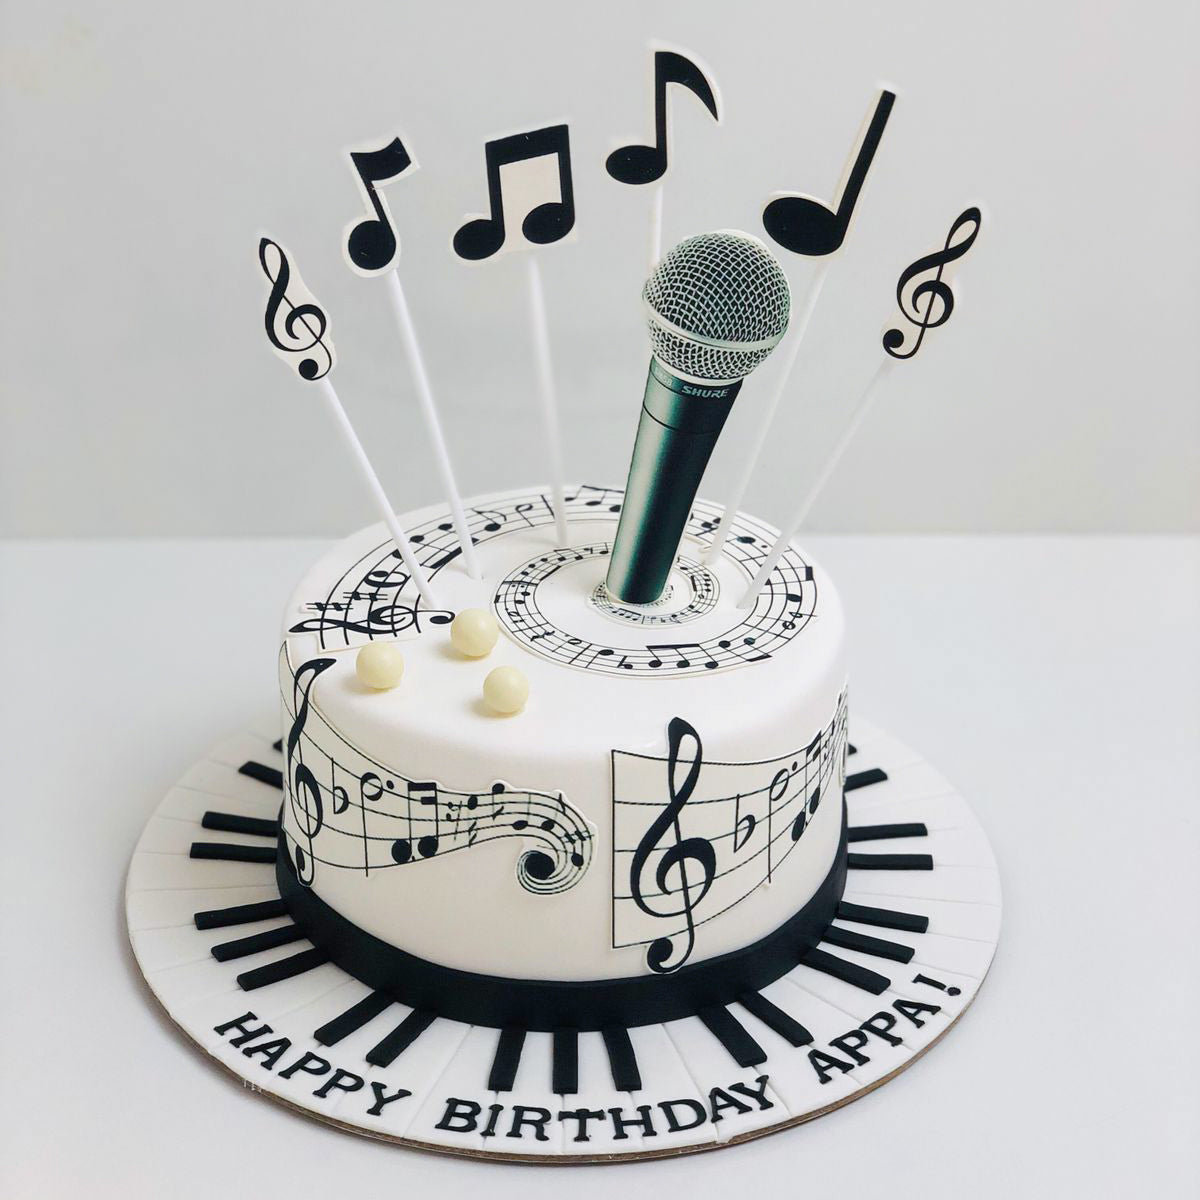 Bells Pastries - Spiral Piano 🎹 Cake . . The last time I created a spiral  piano cake was 10 years ago. So much has changed in my technique, that it  was